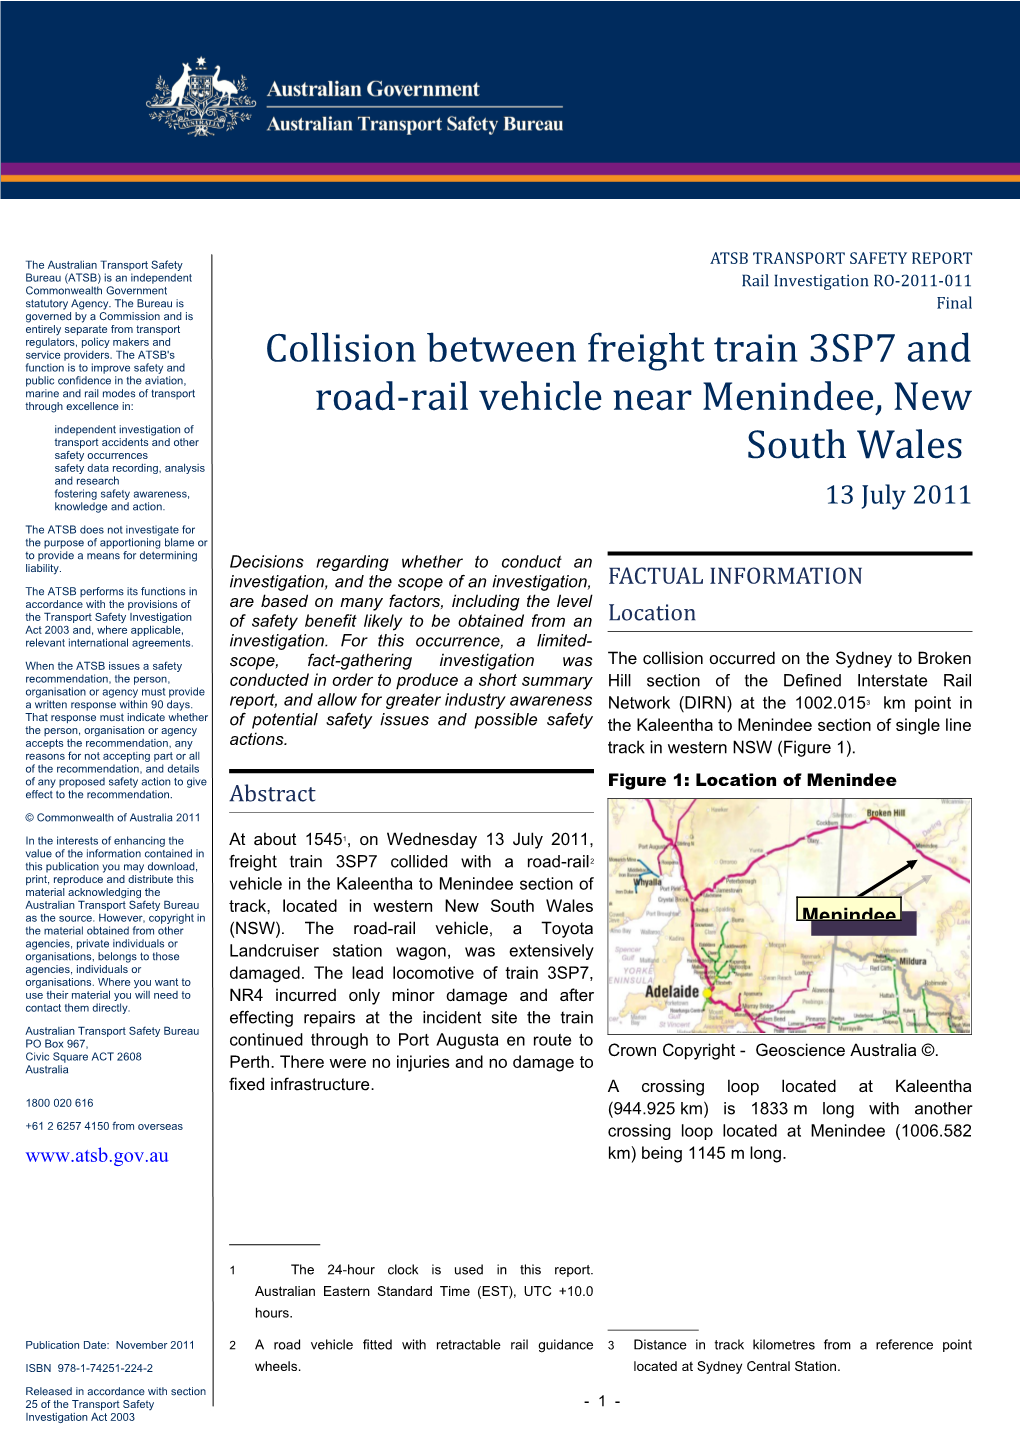 Collision Between Freight Train 3SP7 and Road-Rail Vehicle Near Menindee, New South Wales